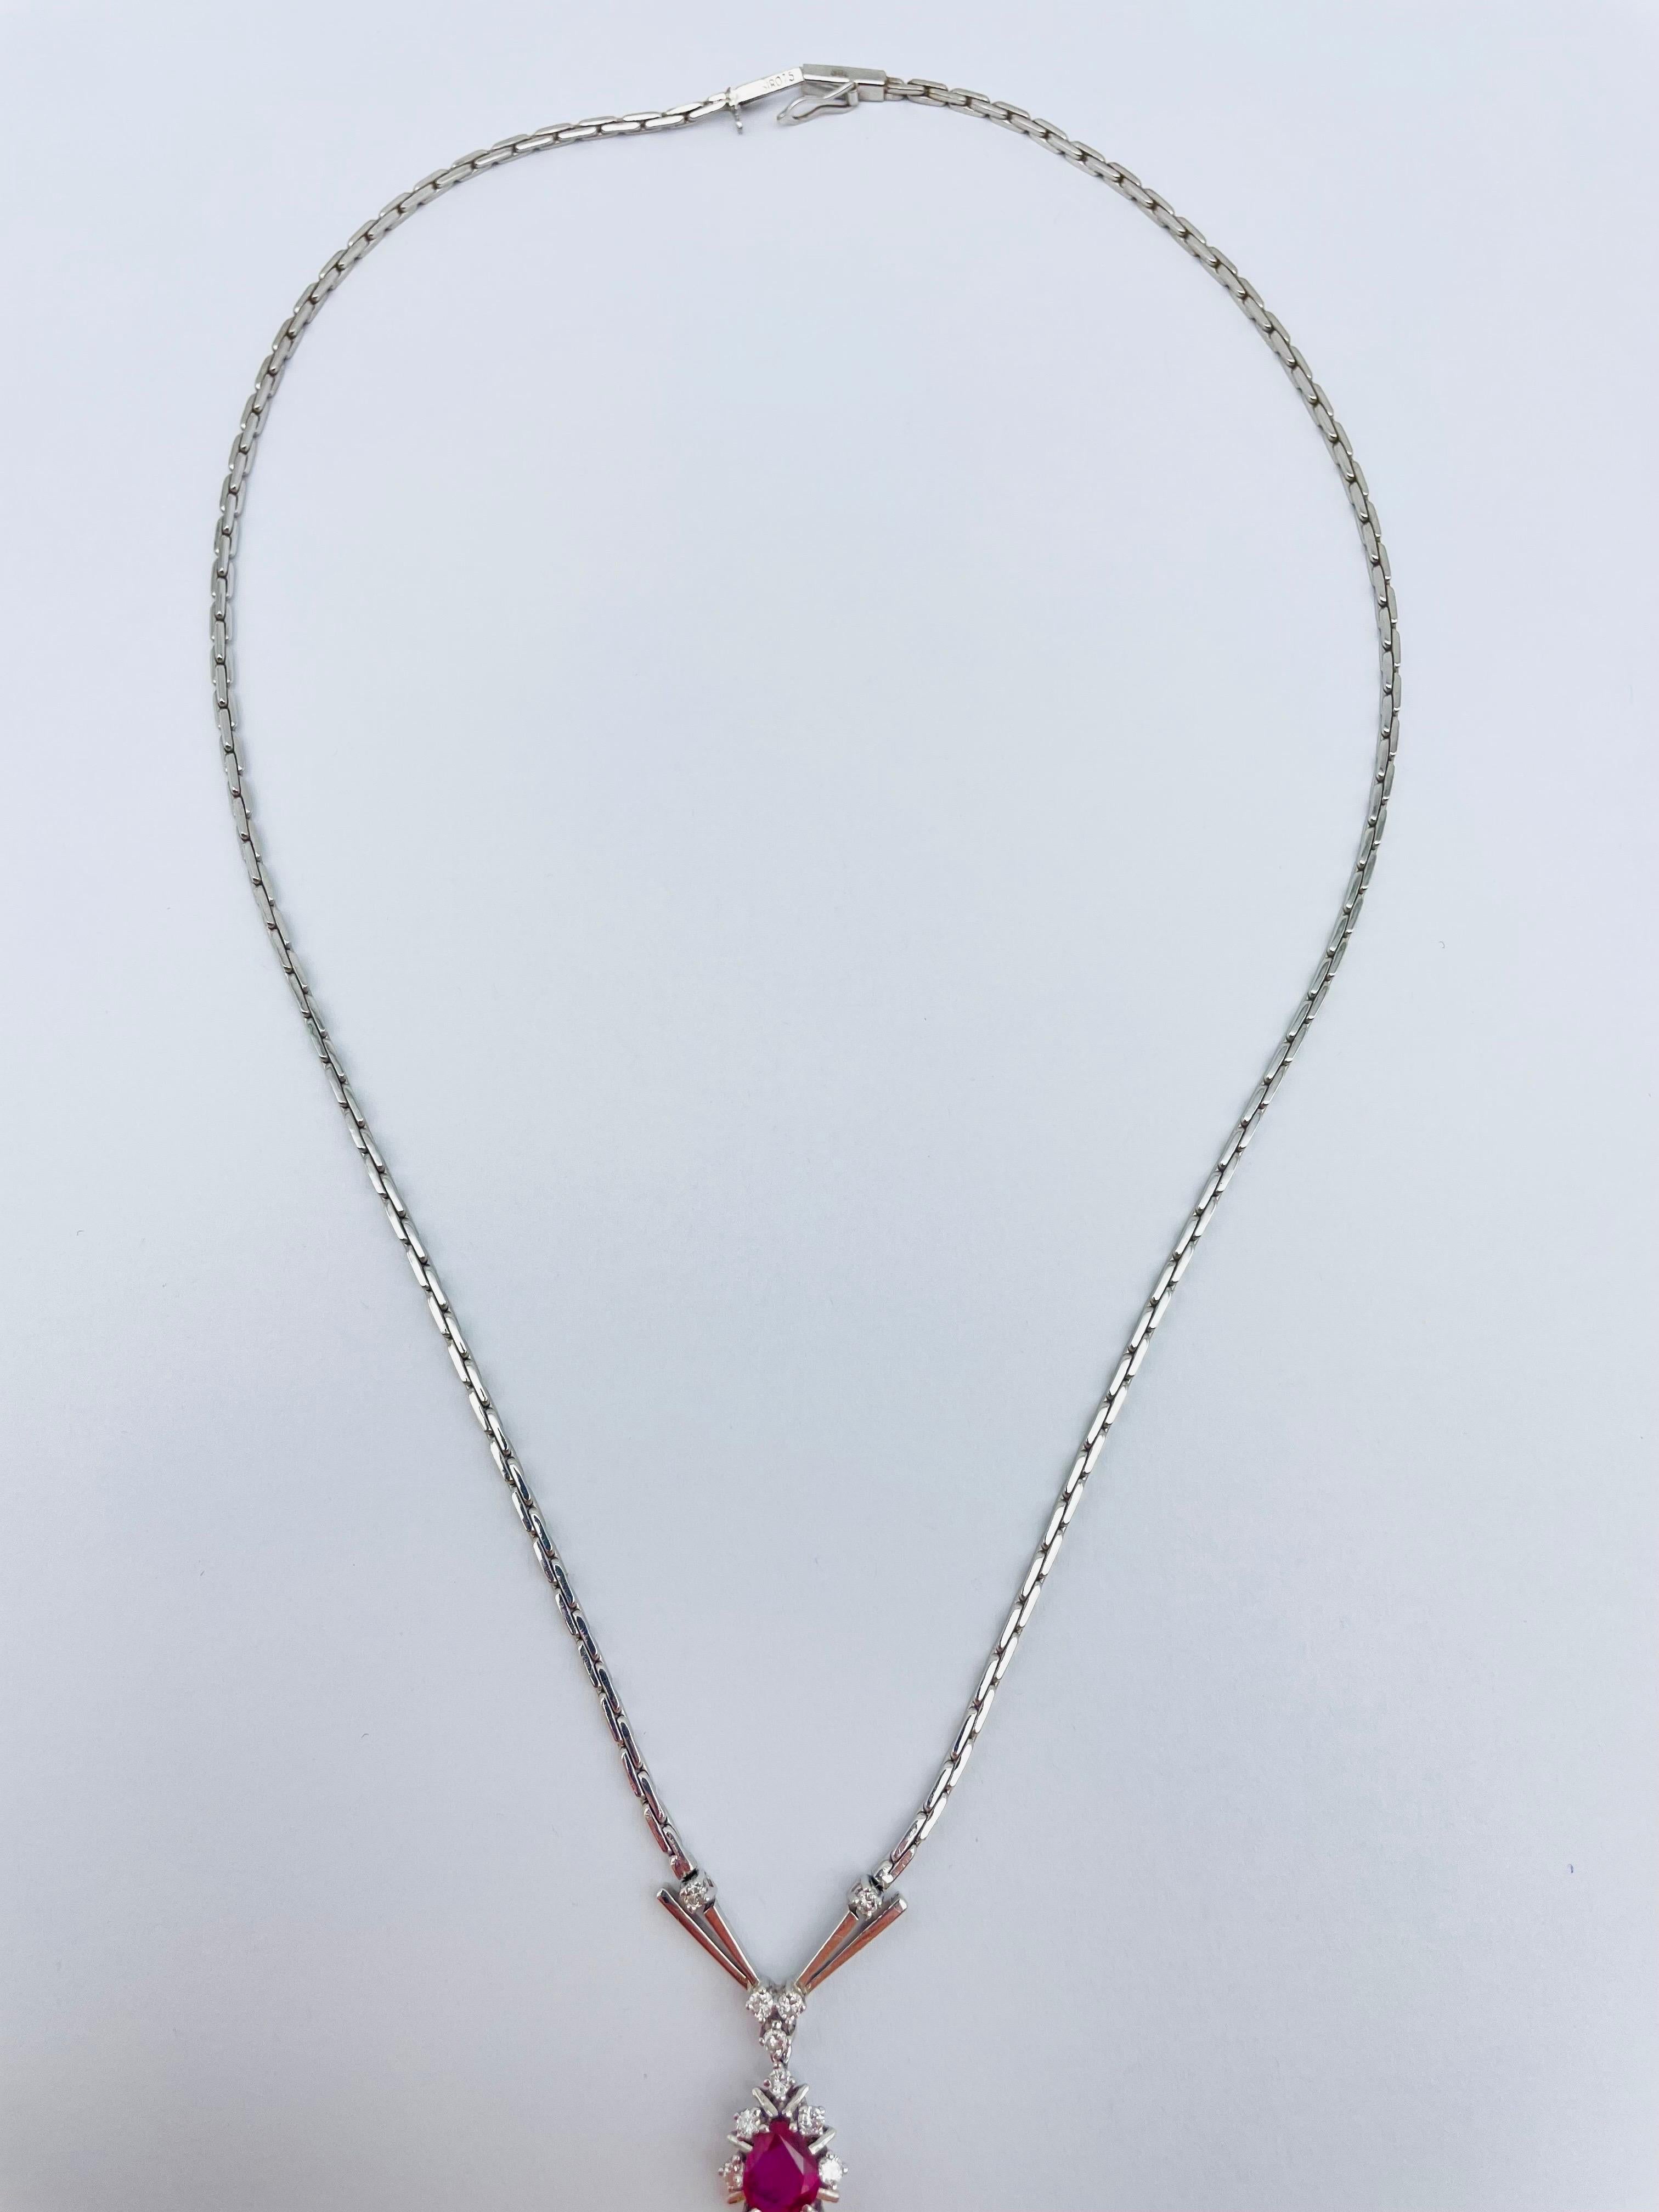 14k Brilliant '0.3 Carat' White Gold Necklace with Red Colored Stone For Sale 4